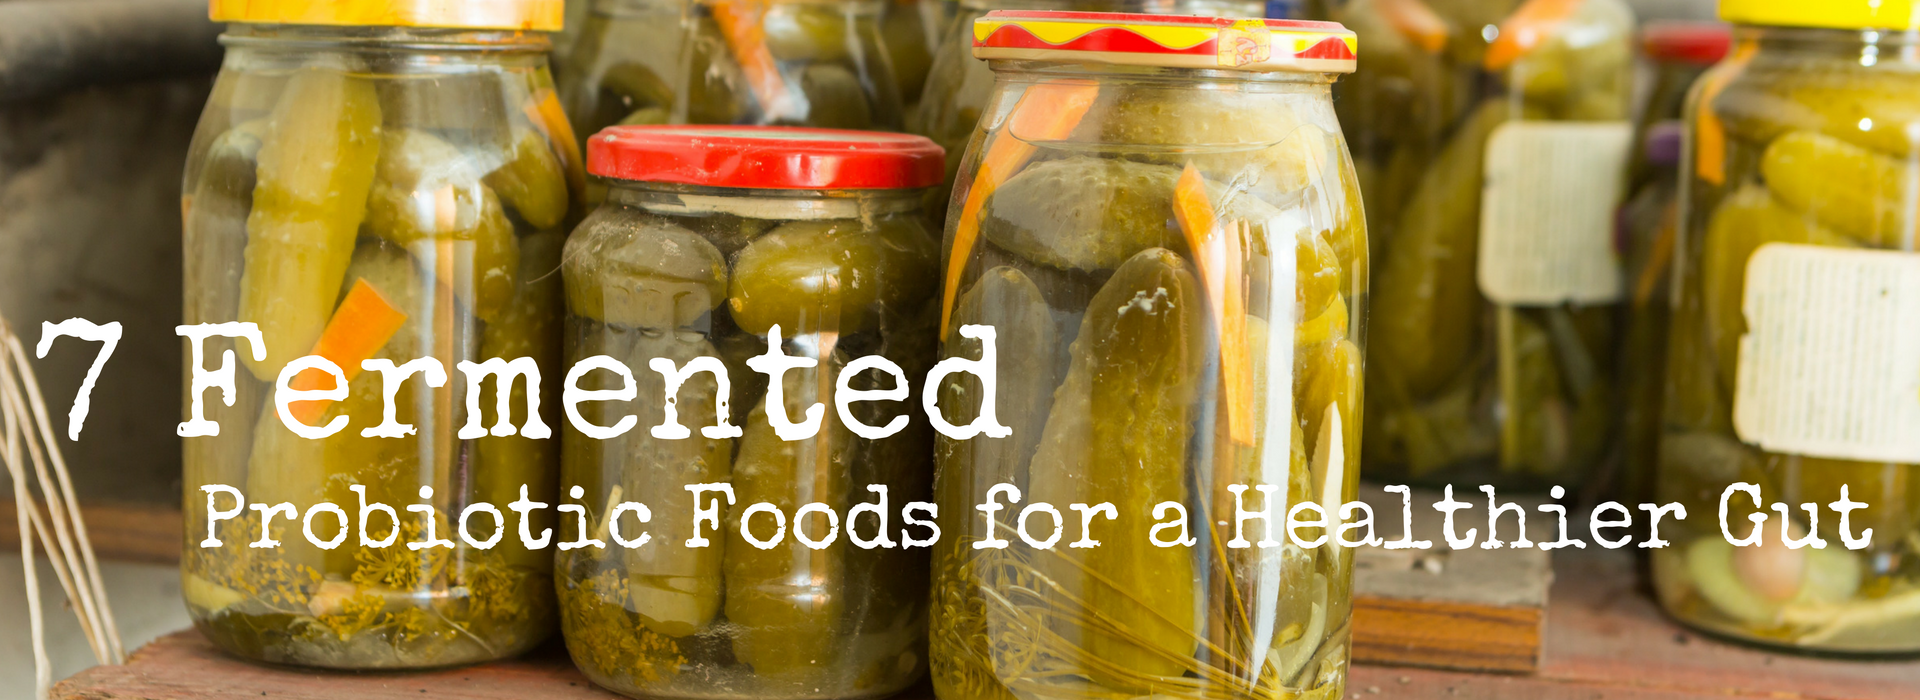 7 Fermented Probiotic Foods for a Healthier Gut